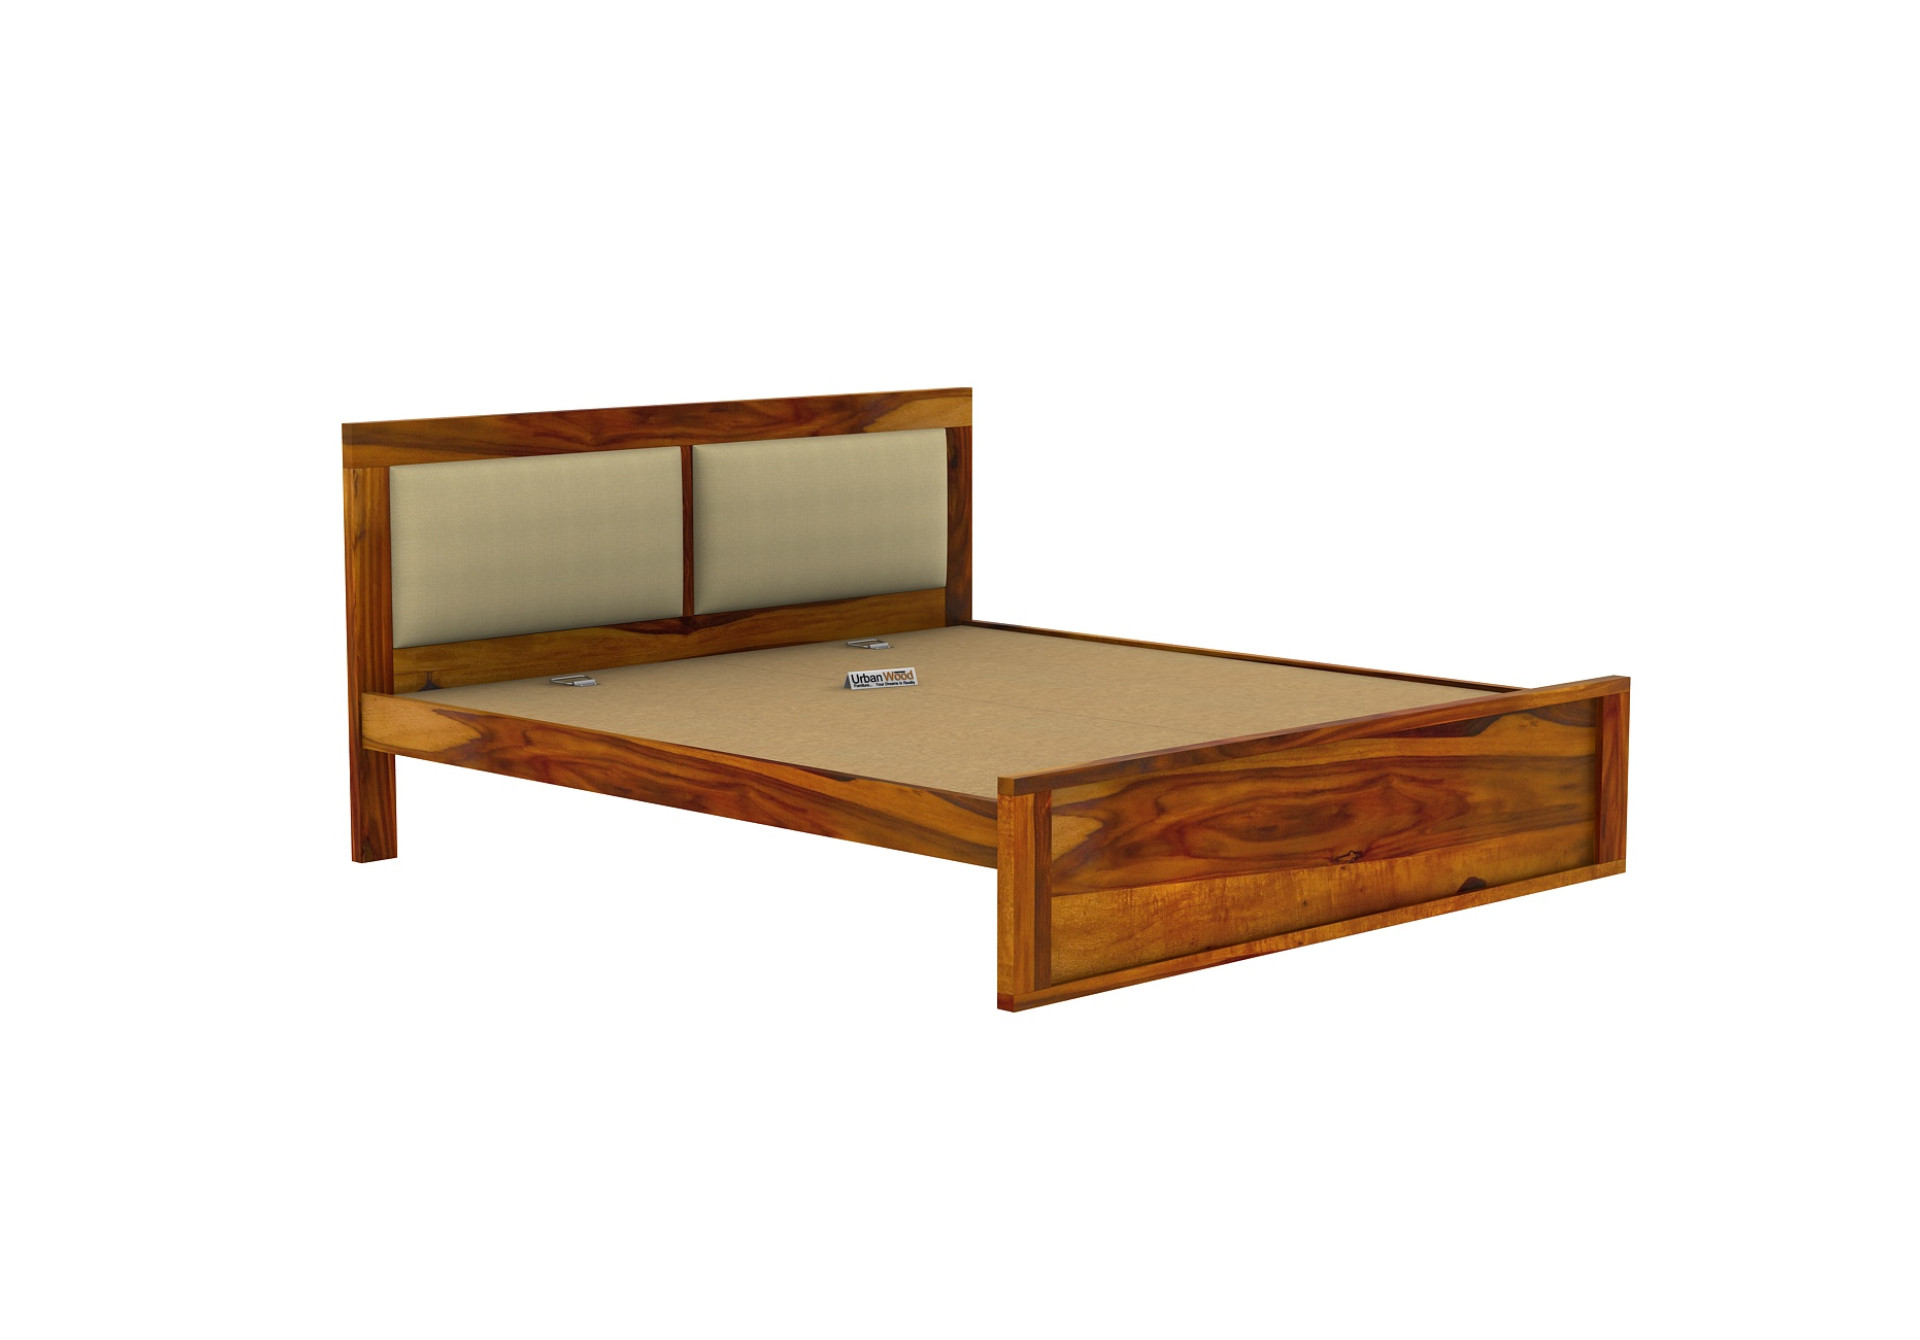 Harris Bed Without Storage ( Queen Size, Honey Finish )